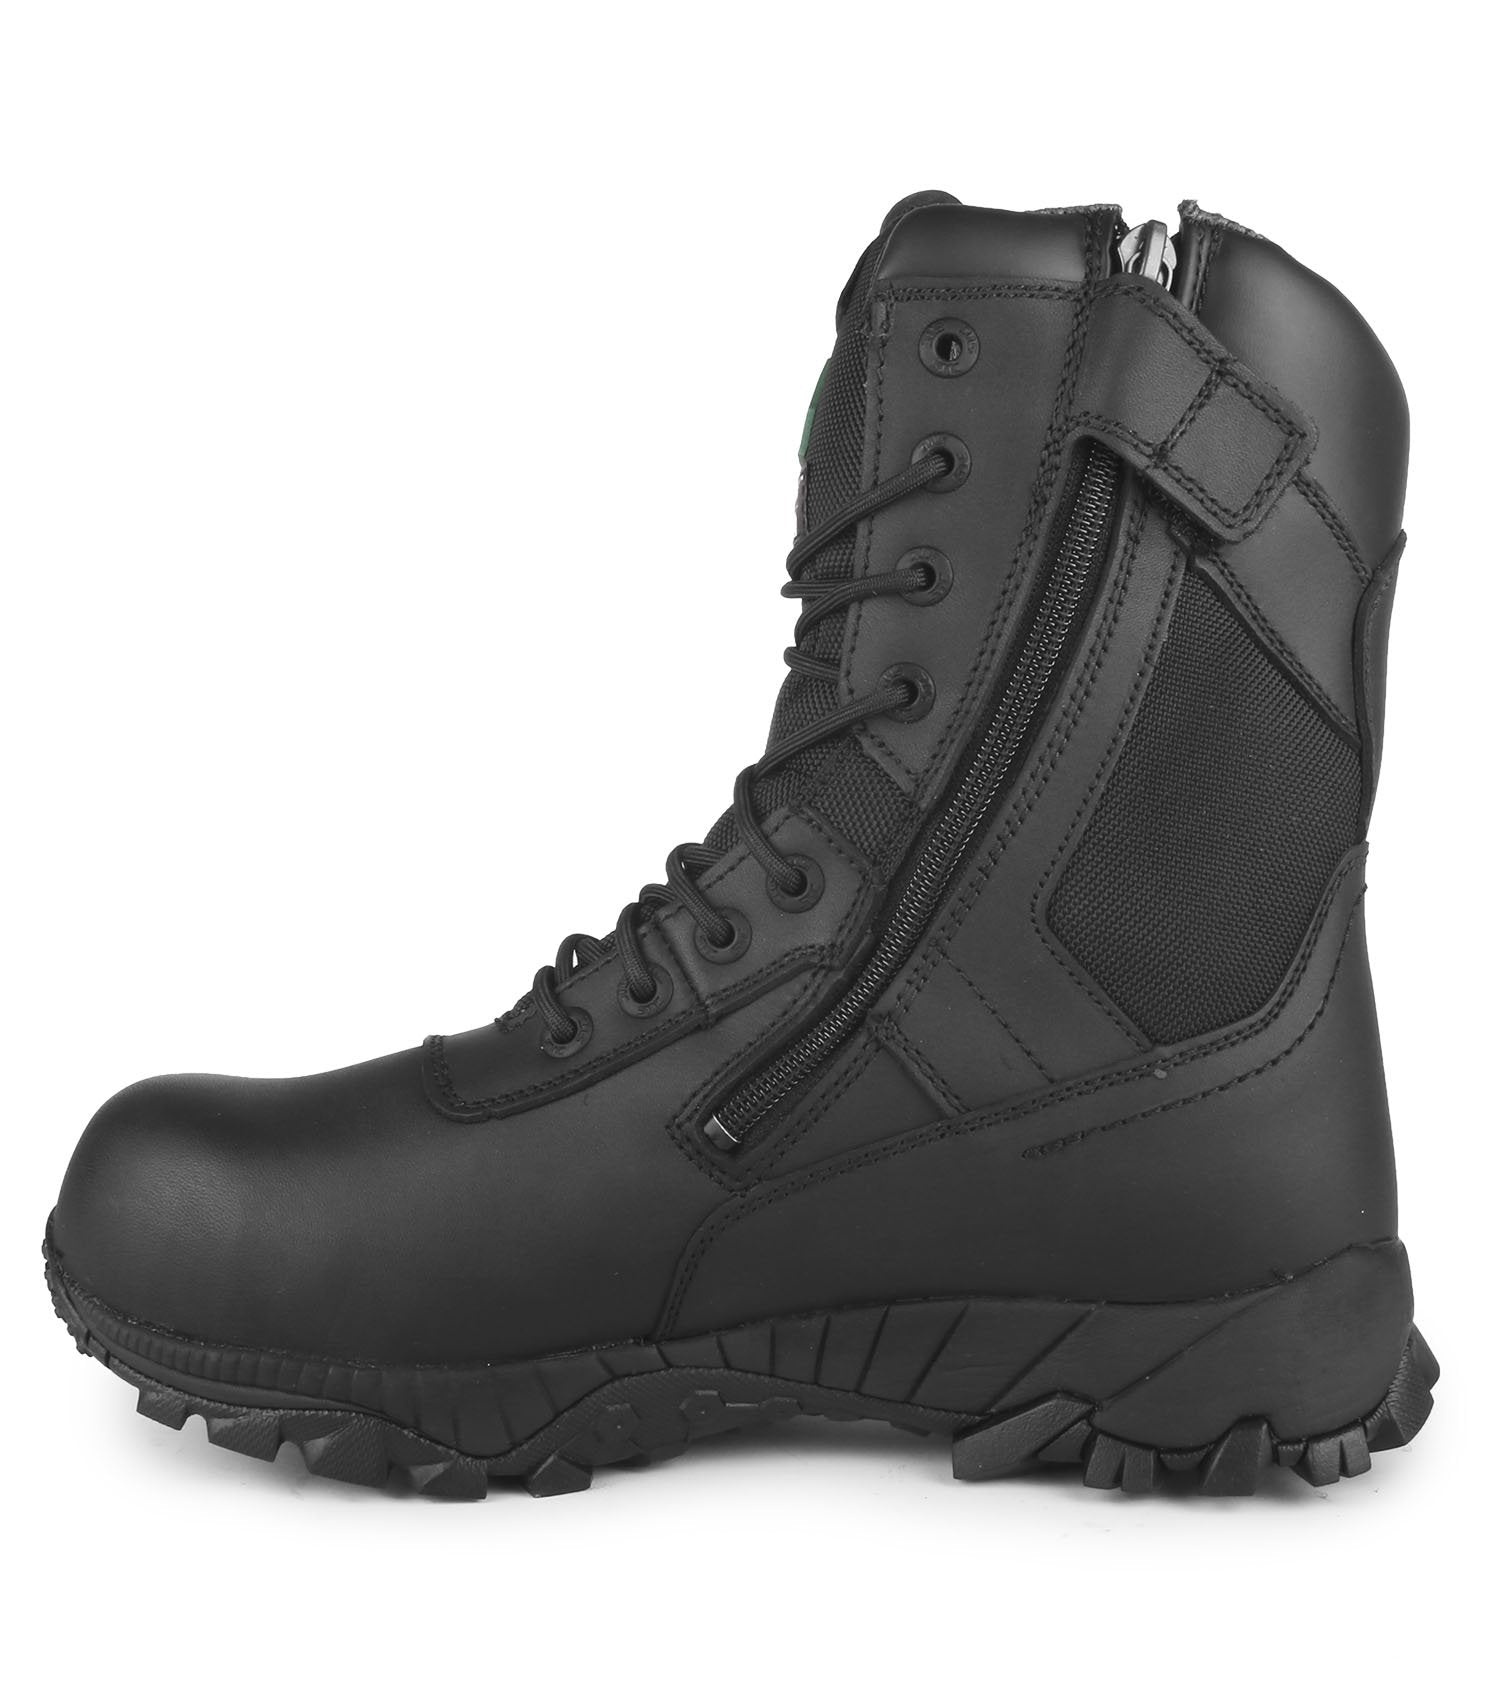 STC Tactik 8" Tactical Side-Zip Safety Boot | Black | Sizes 7 - 14 Work Boots - Cleanflow